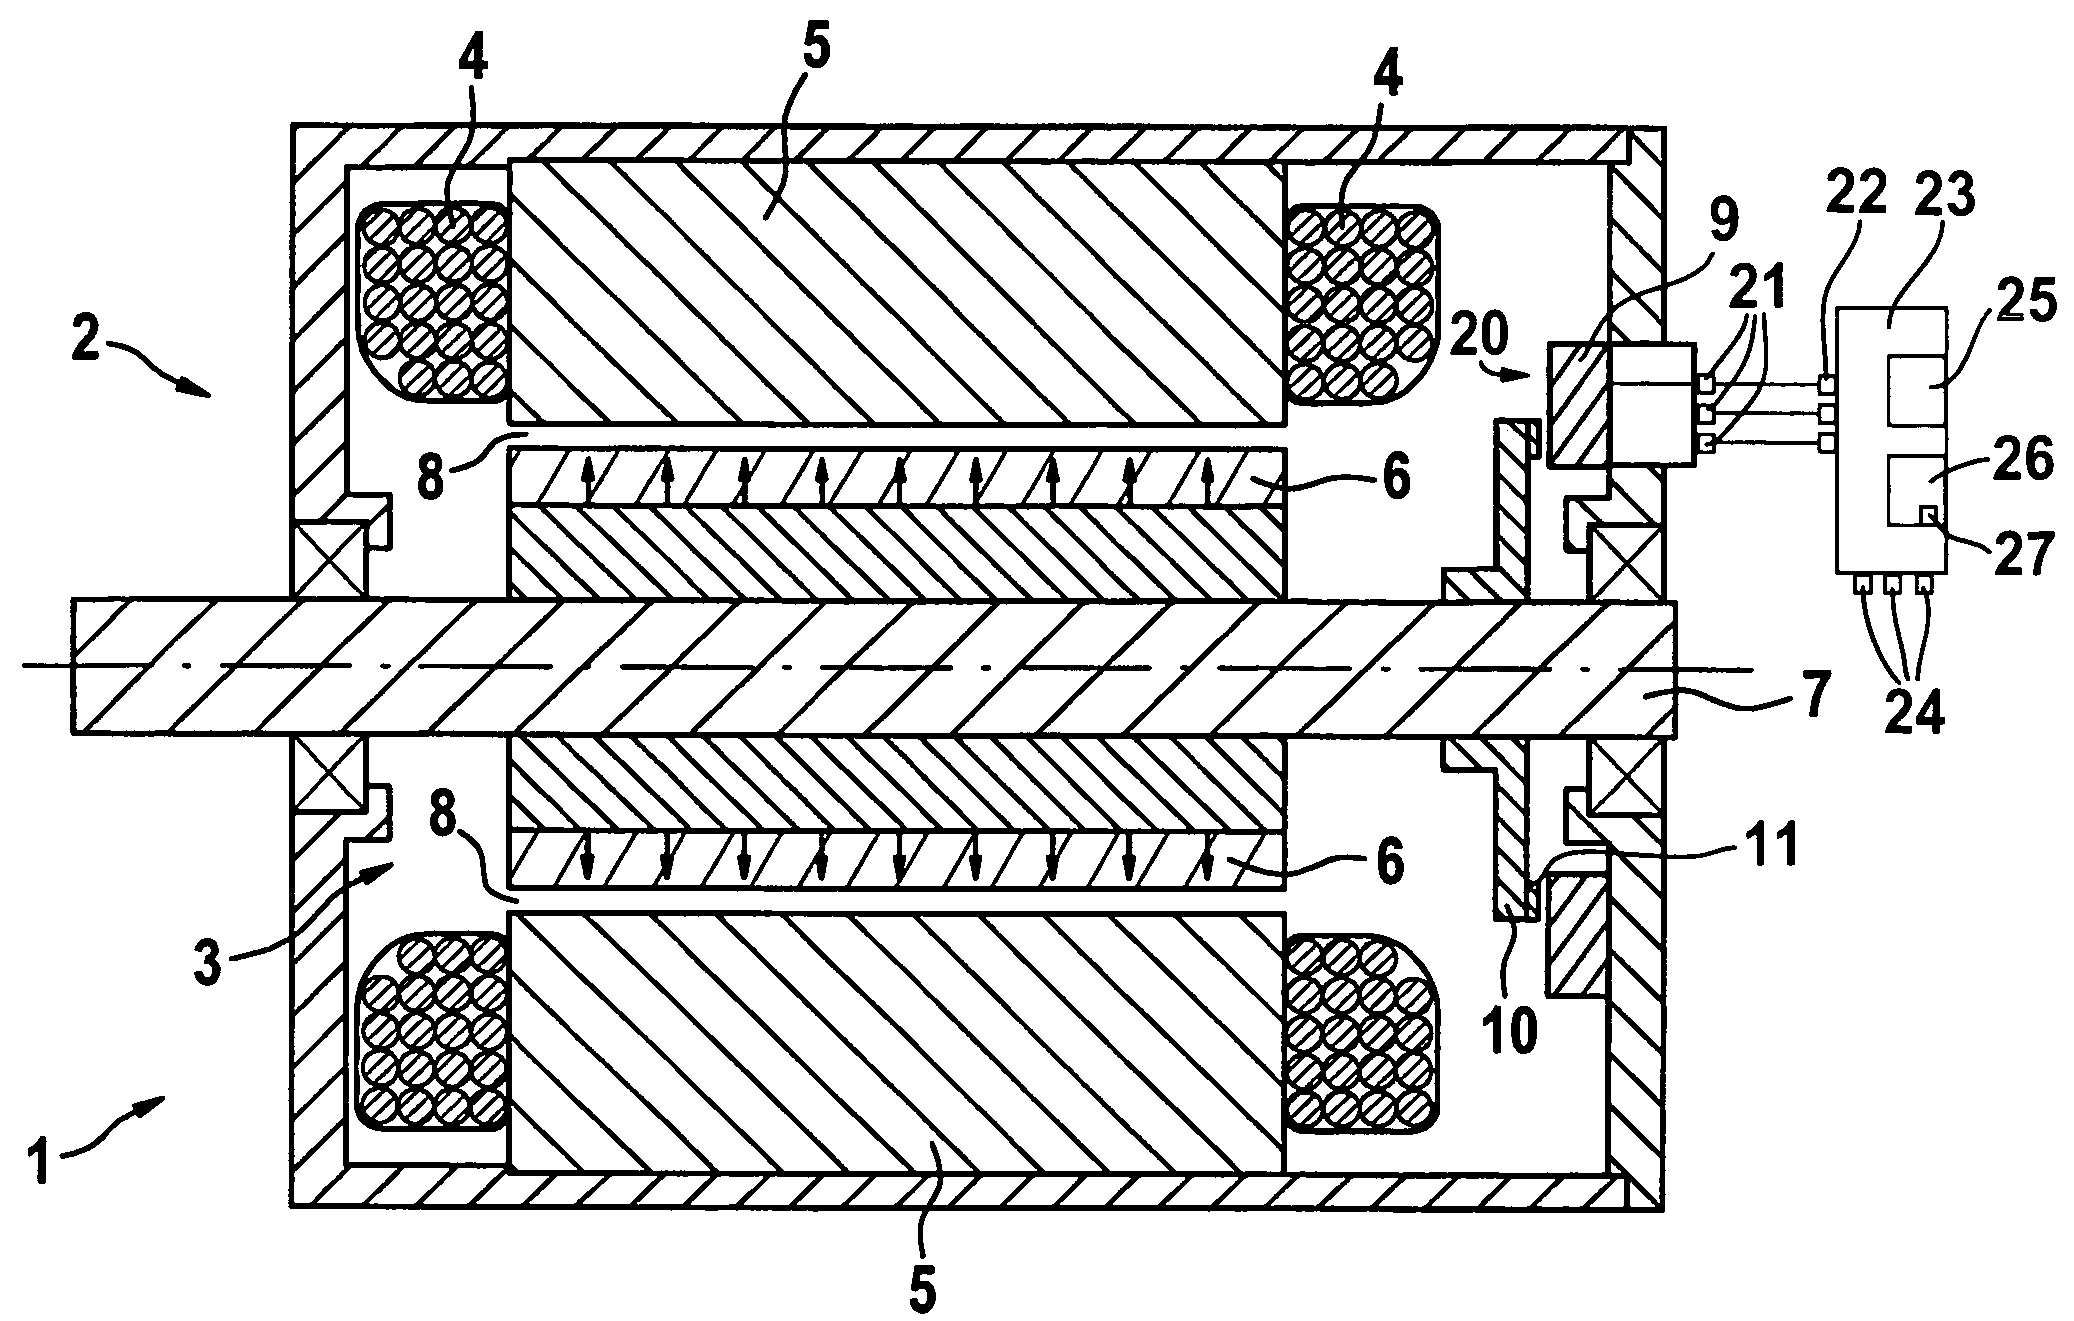 EC motor and method for operating same